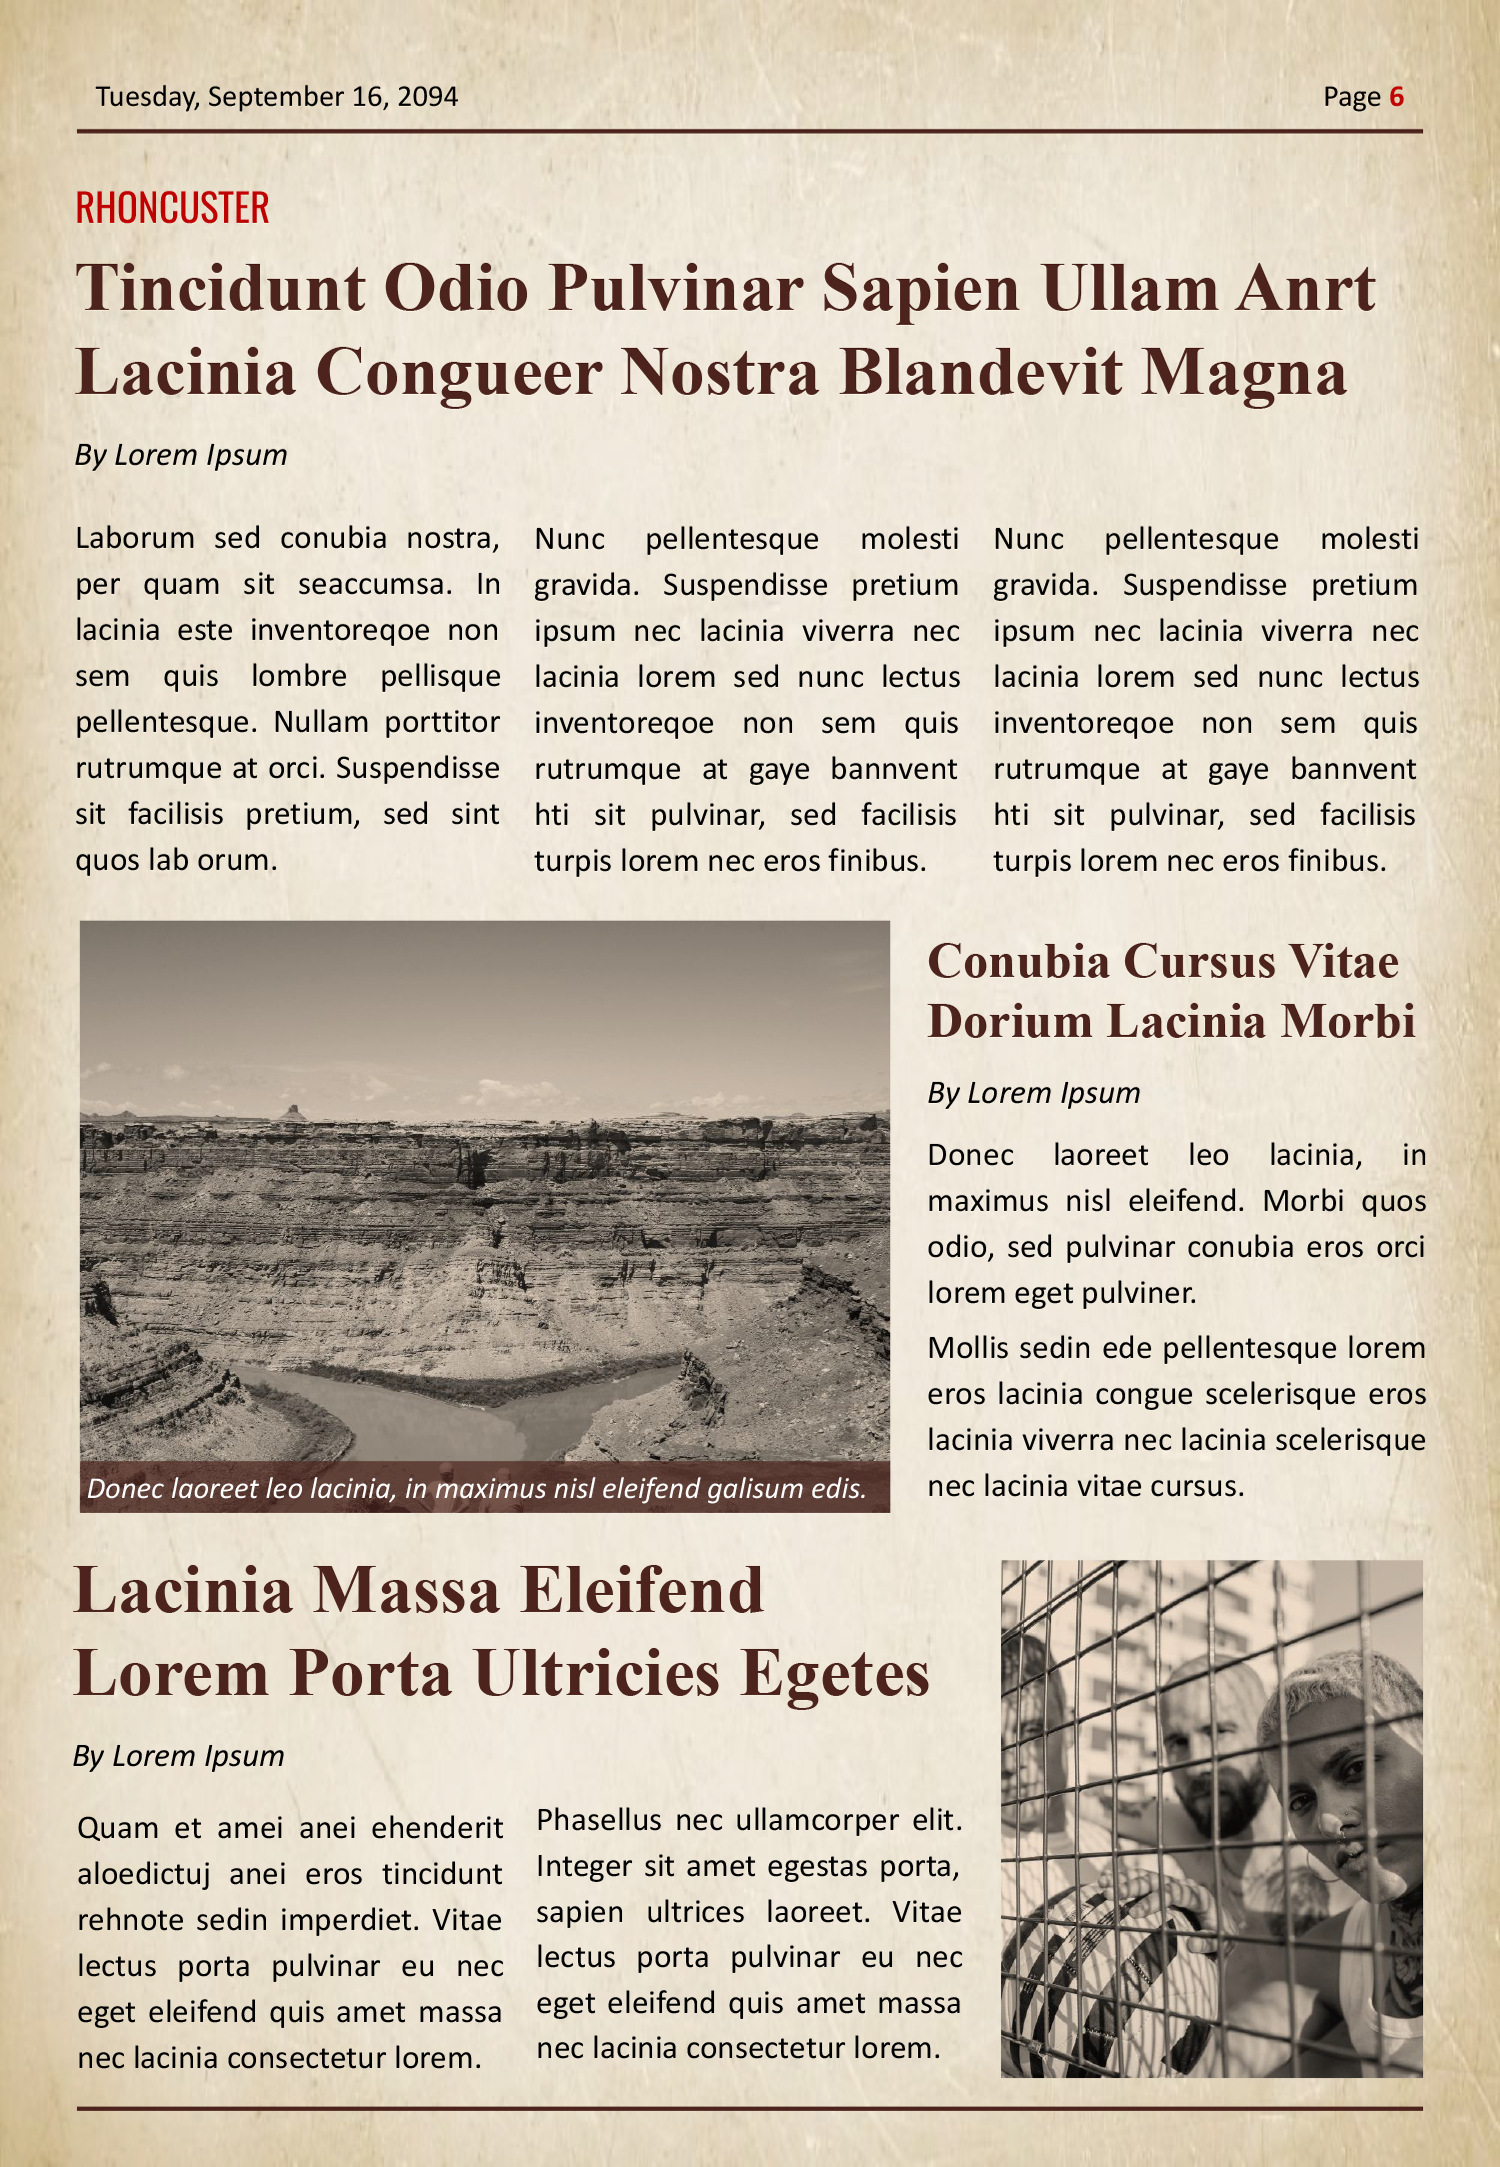 Vintage A4 Newspaper Template - Page 06